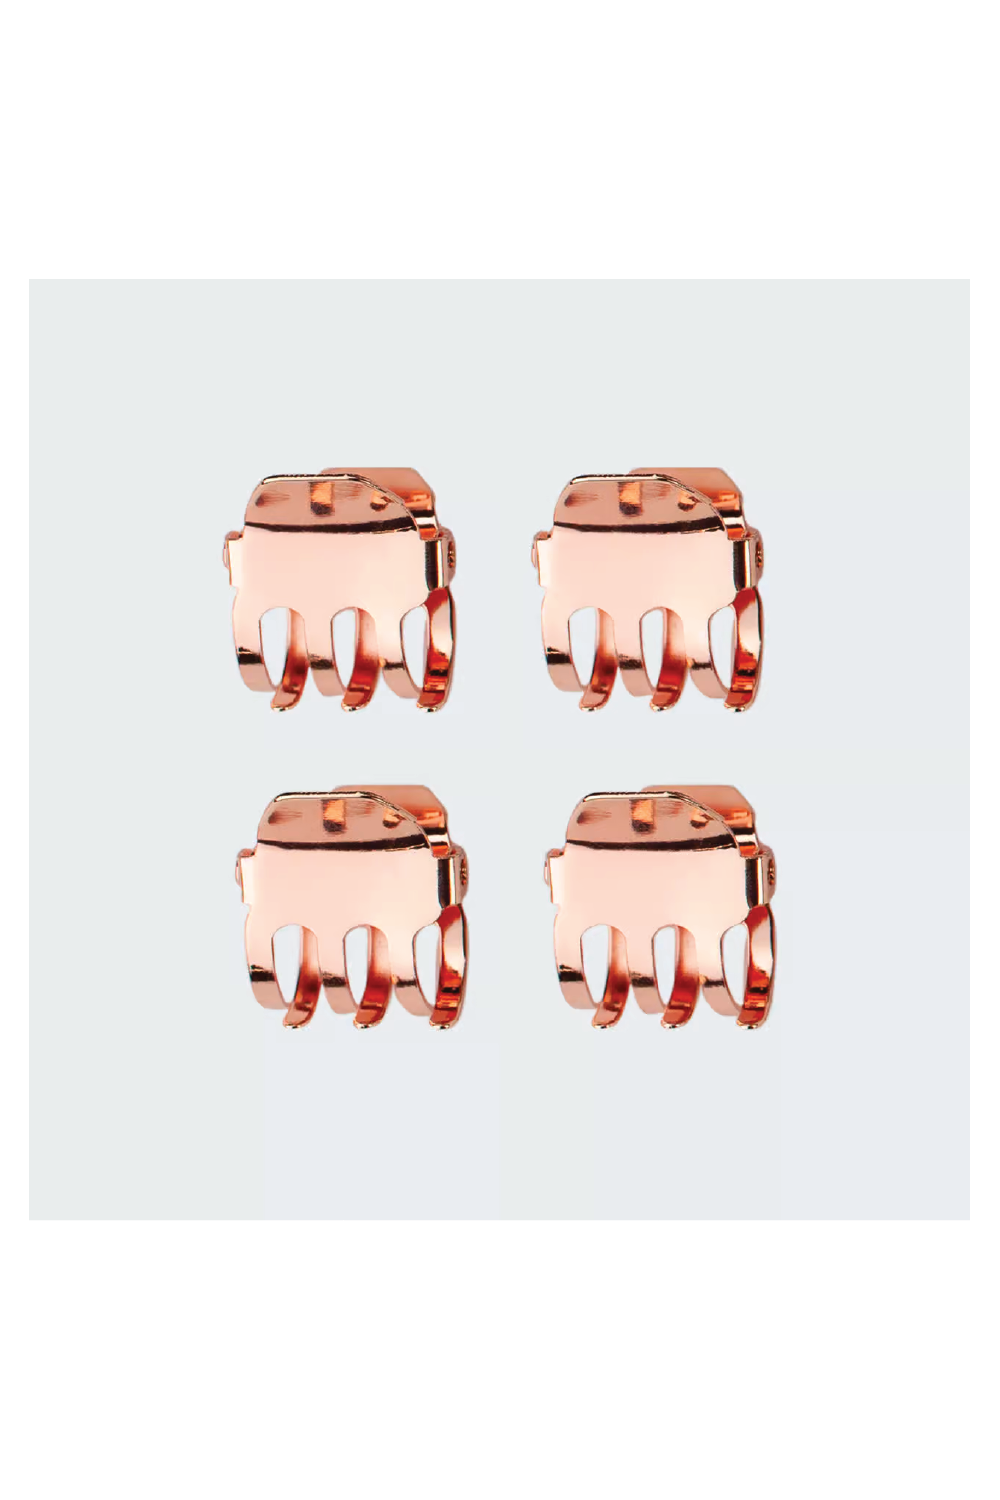 Kitsch Mini Claw Clips Square Rose Gold